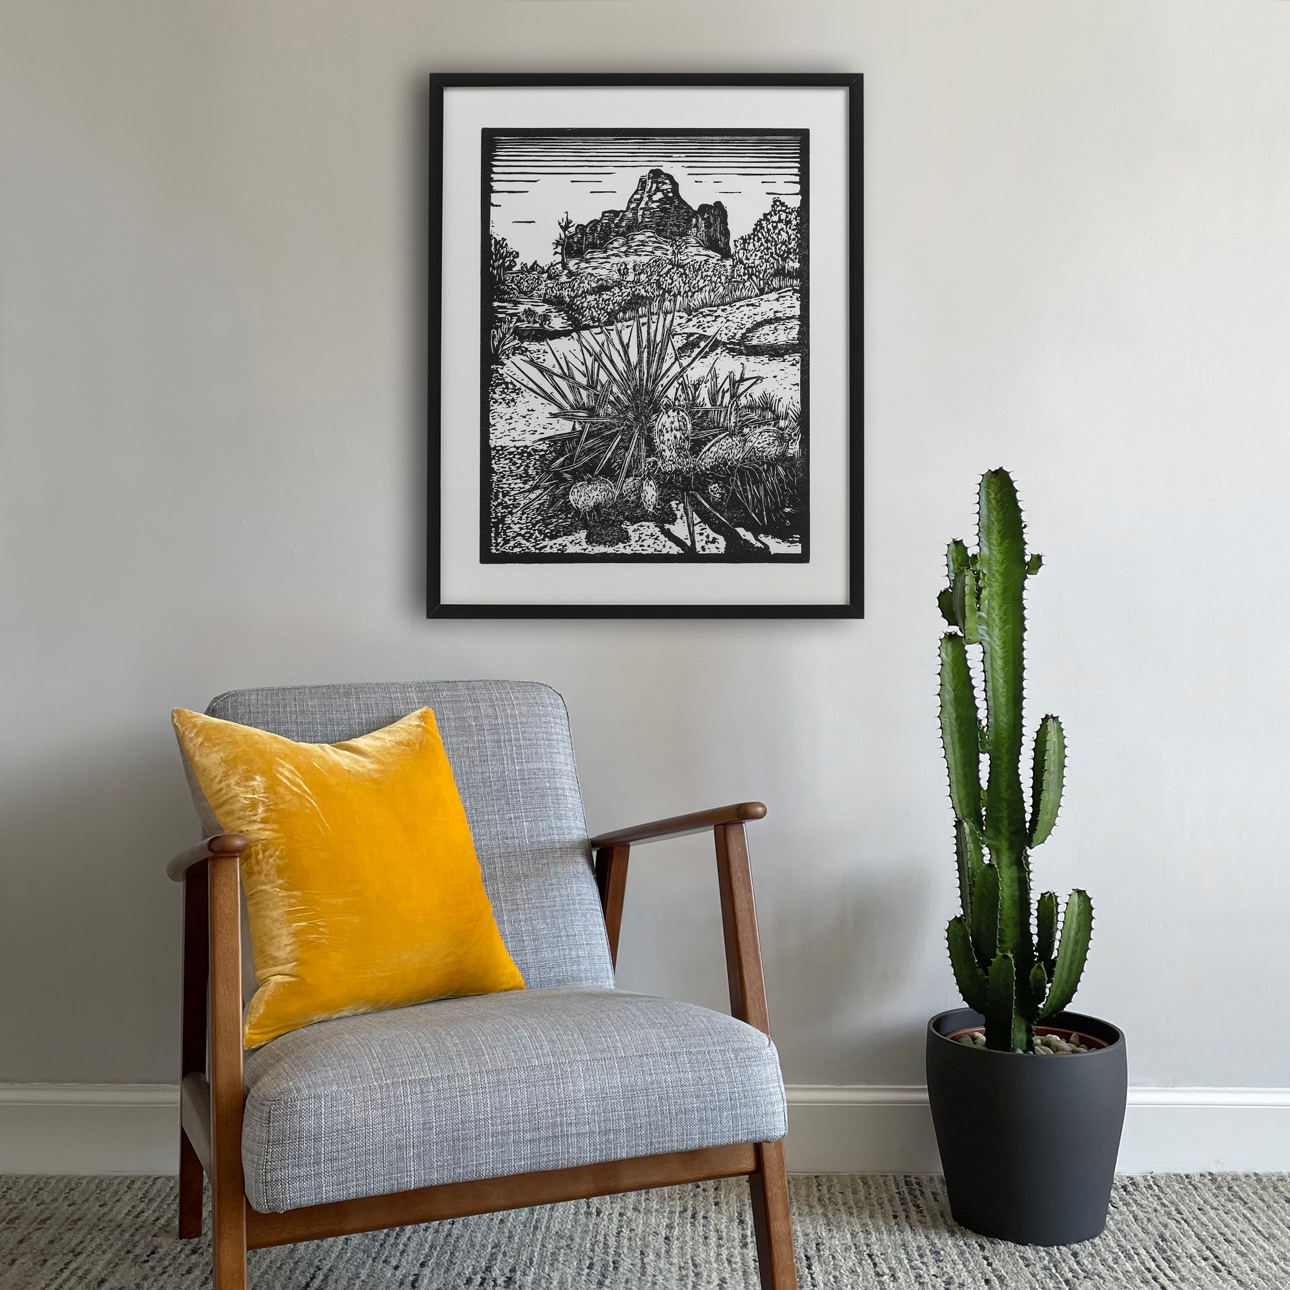 The Inkery's Bell Rock large giclee print with chair and cactus